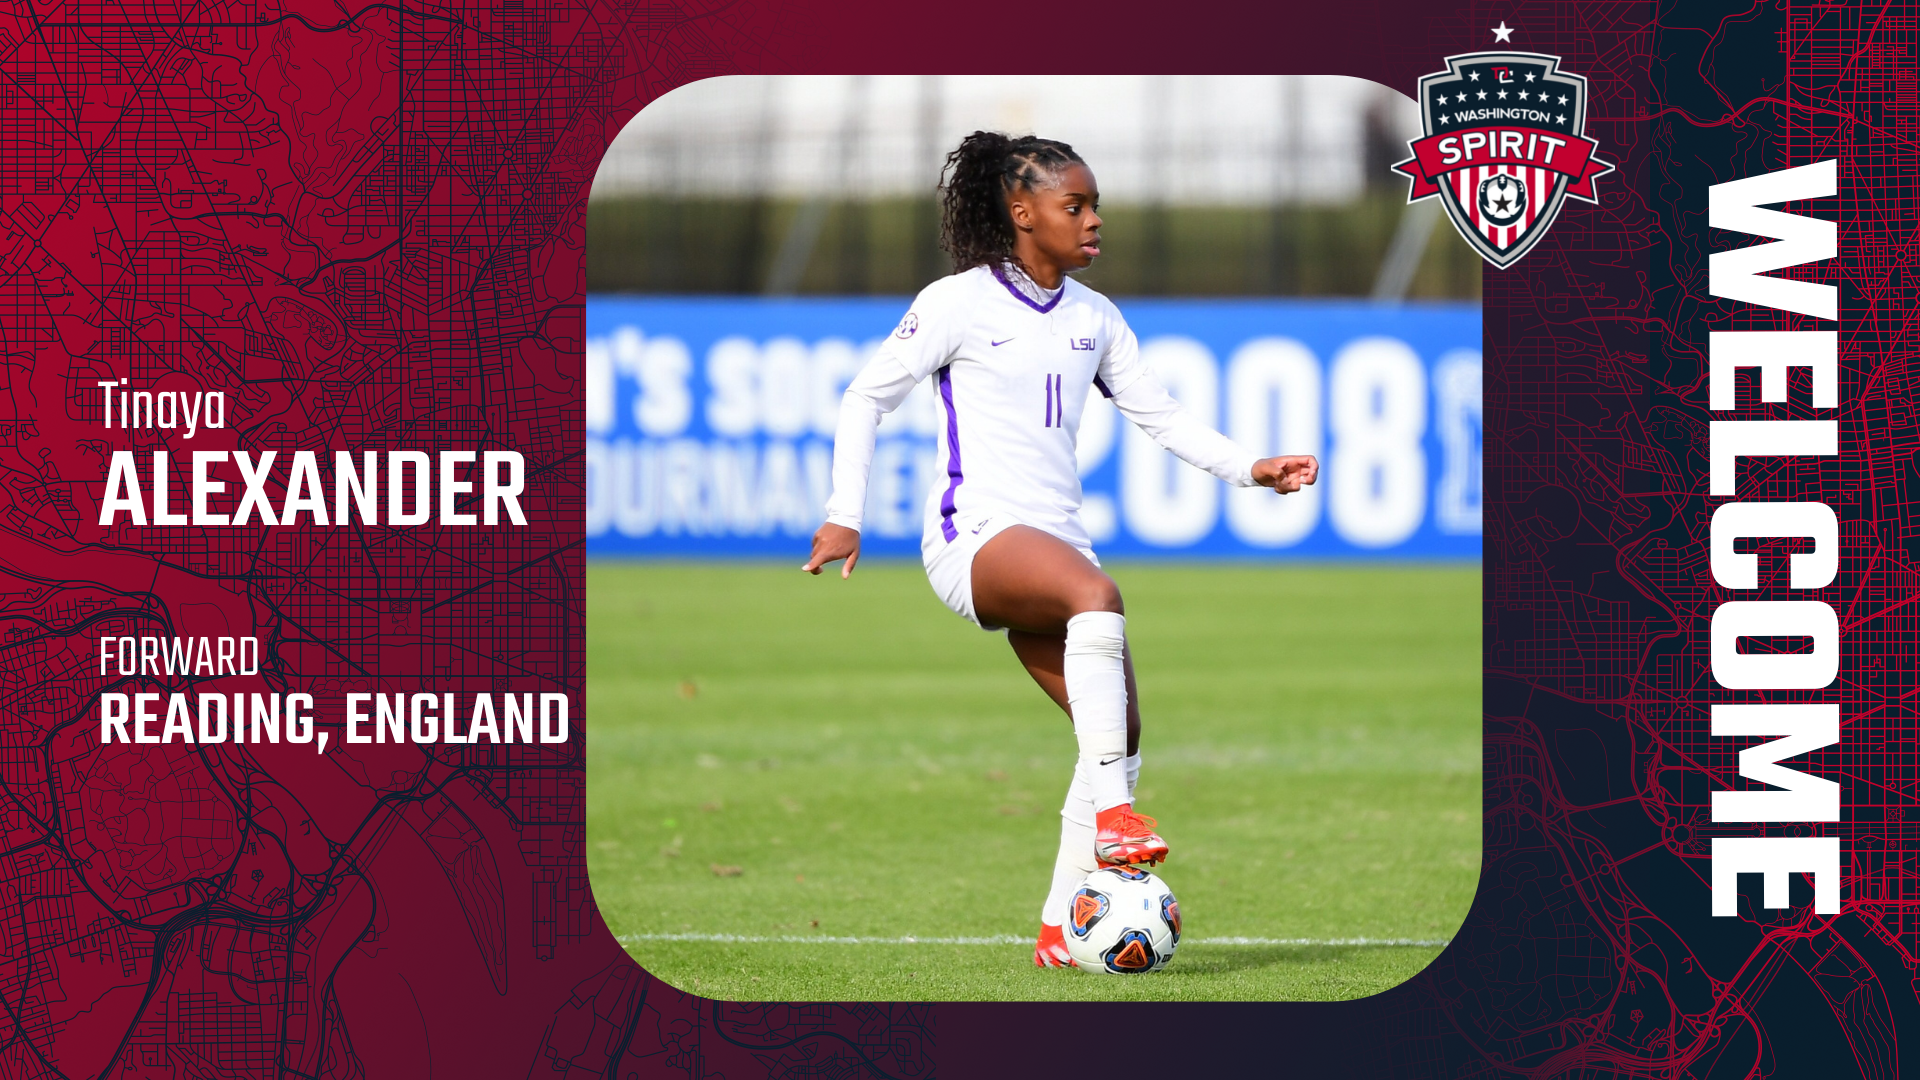 Washington Spirit select Tinaya Alexander 14th overall in the 2022 NWSL Draft Featured Image